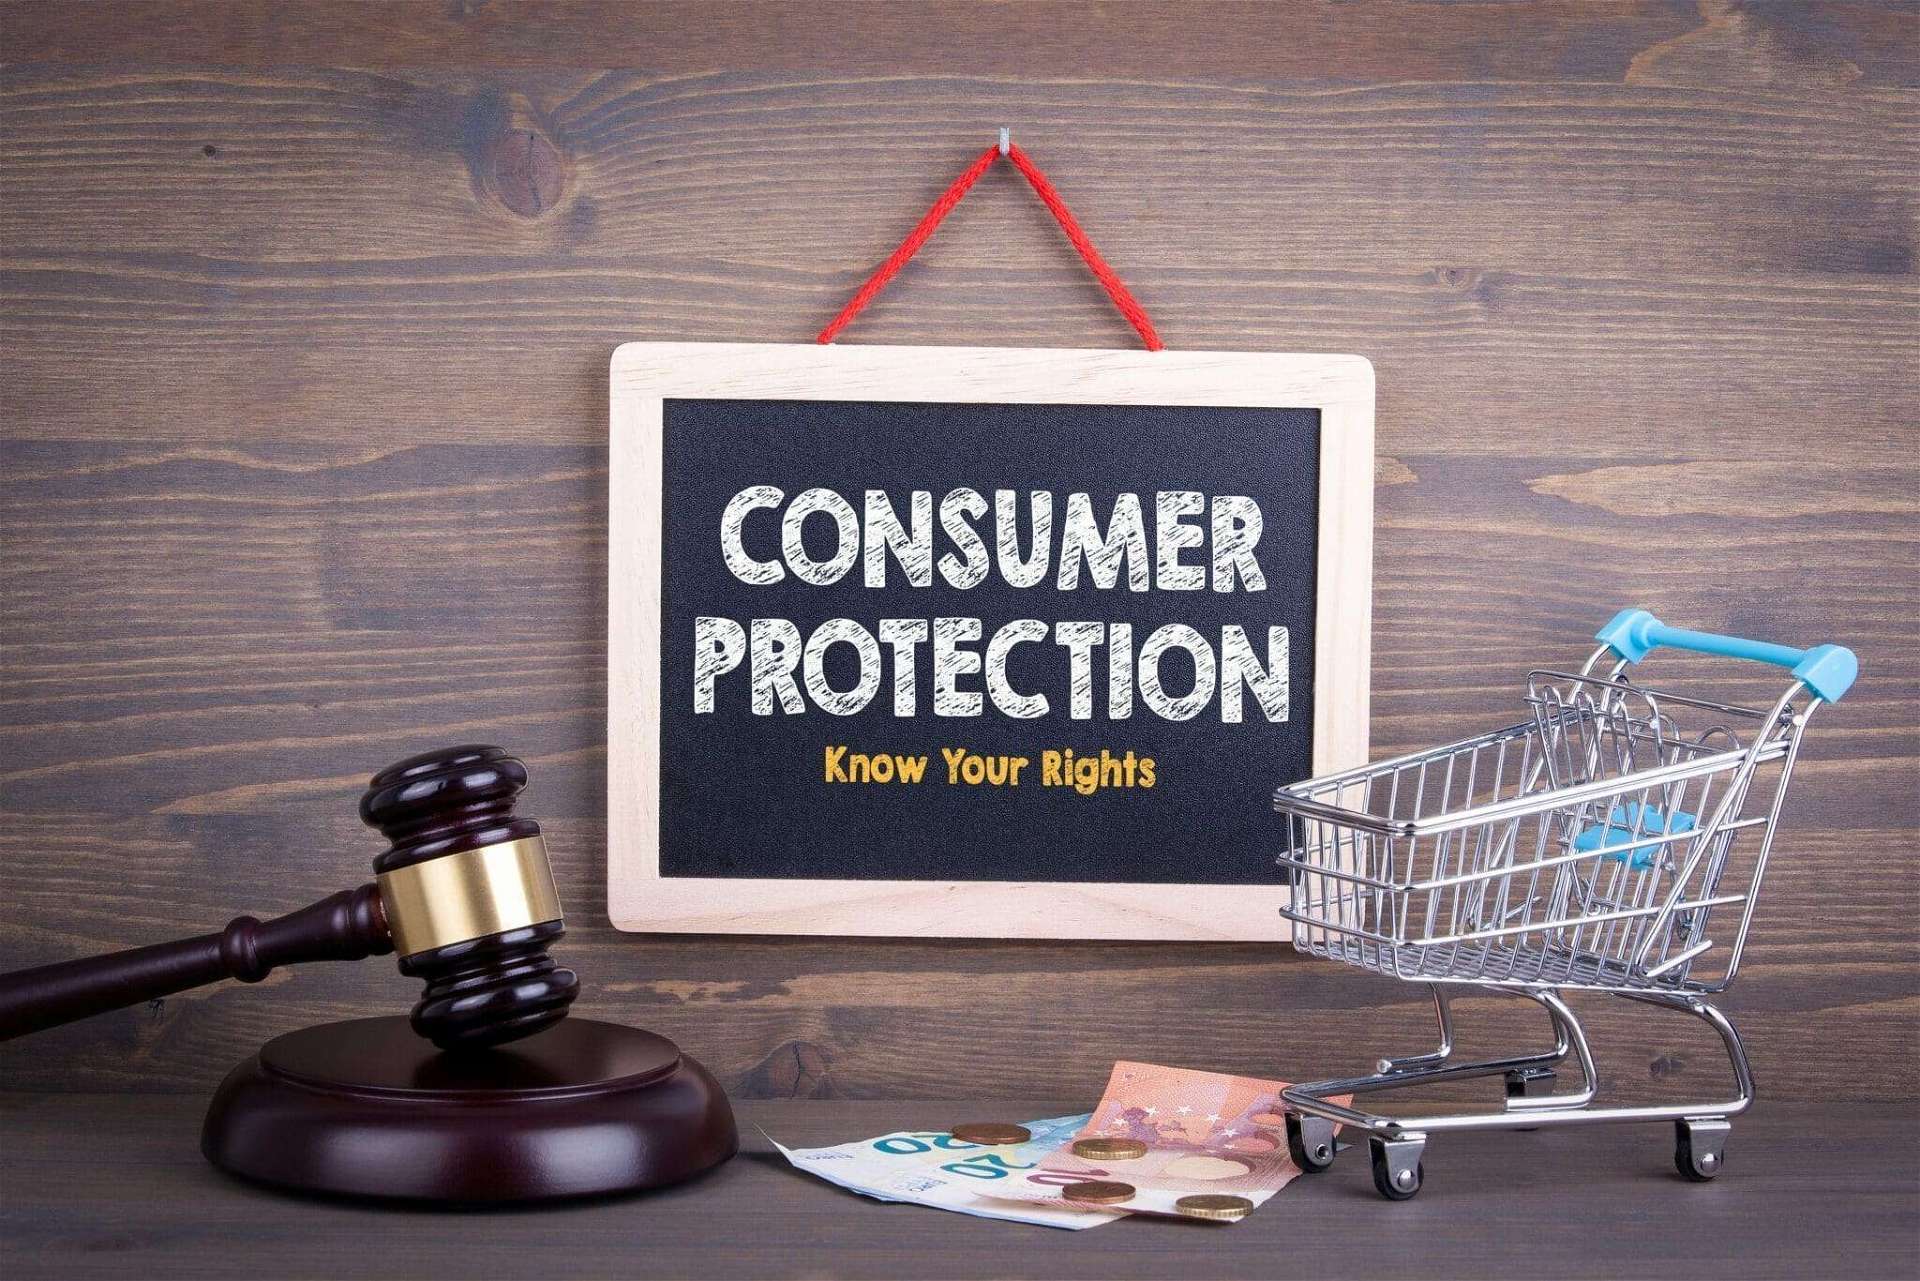 Serka Law Firm Investment And Company Consultancy in Turkey - Consumer Rights and Consumer Law in Turkey